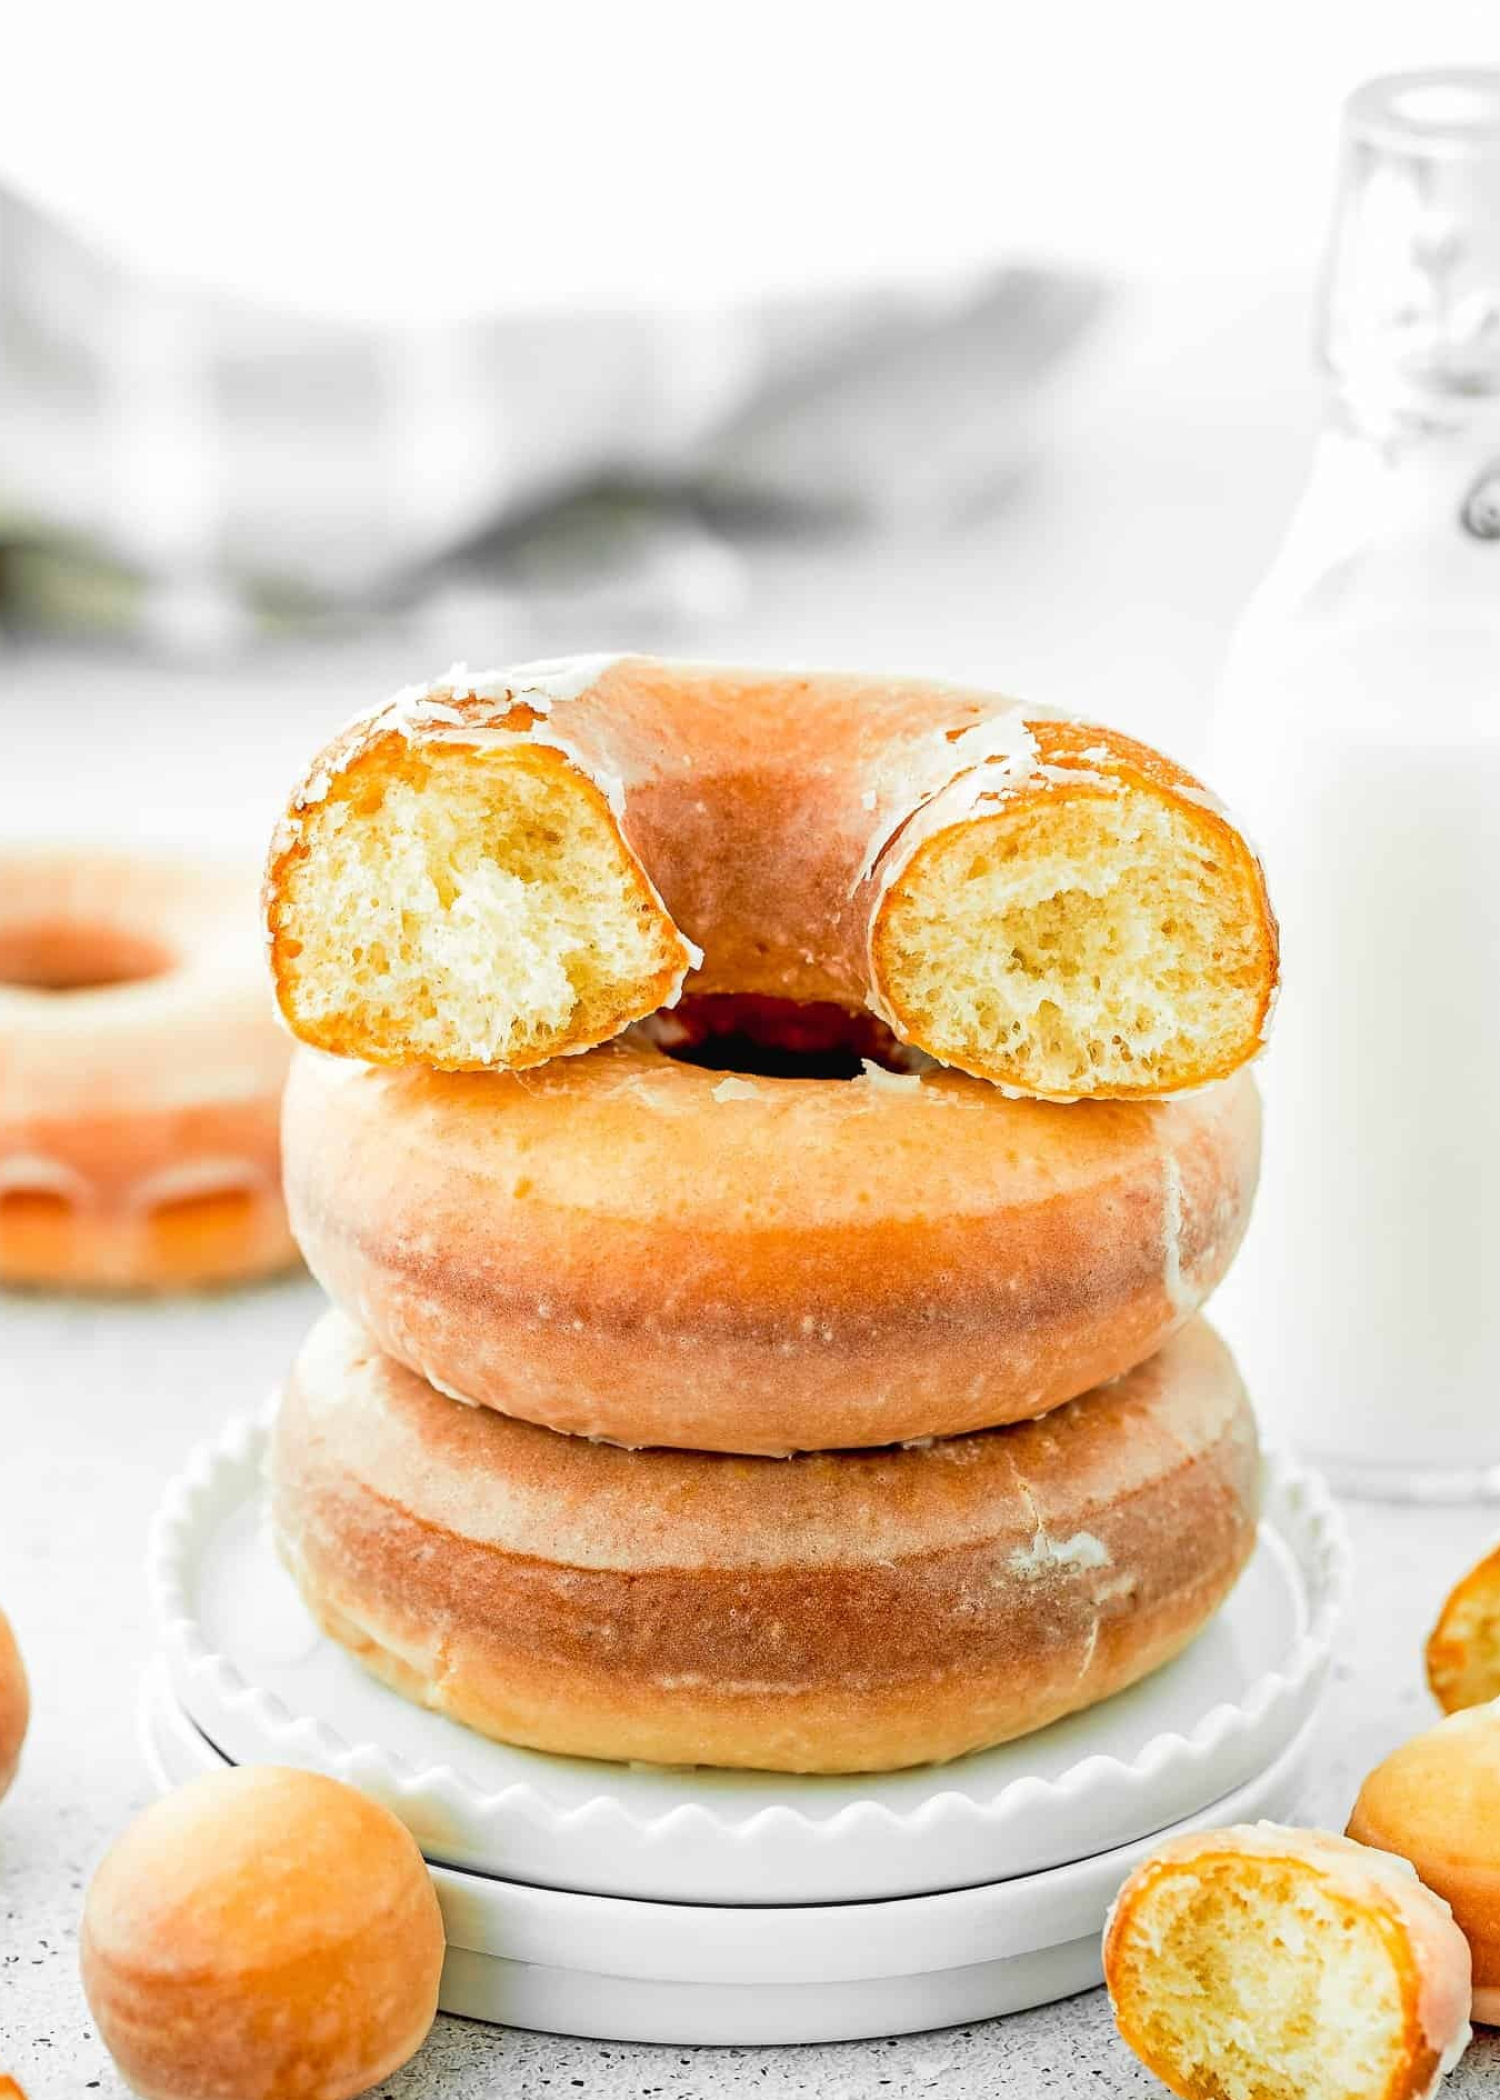 Donut: Recognized as a circular pastry with a hole in the middle. 1500x2100 HD Wallpaper.